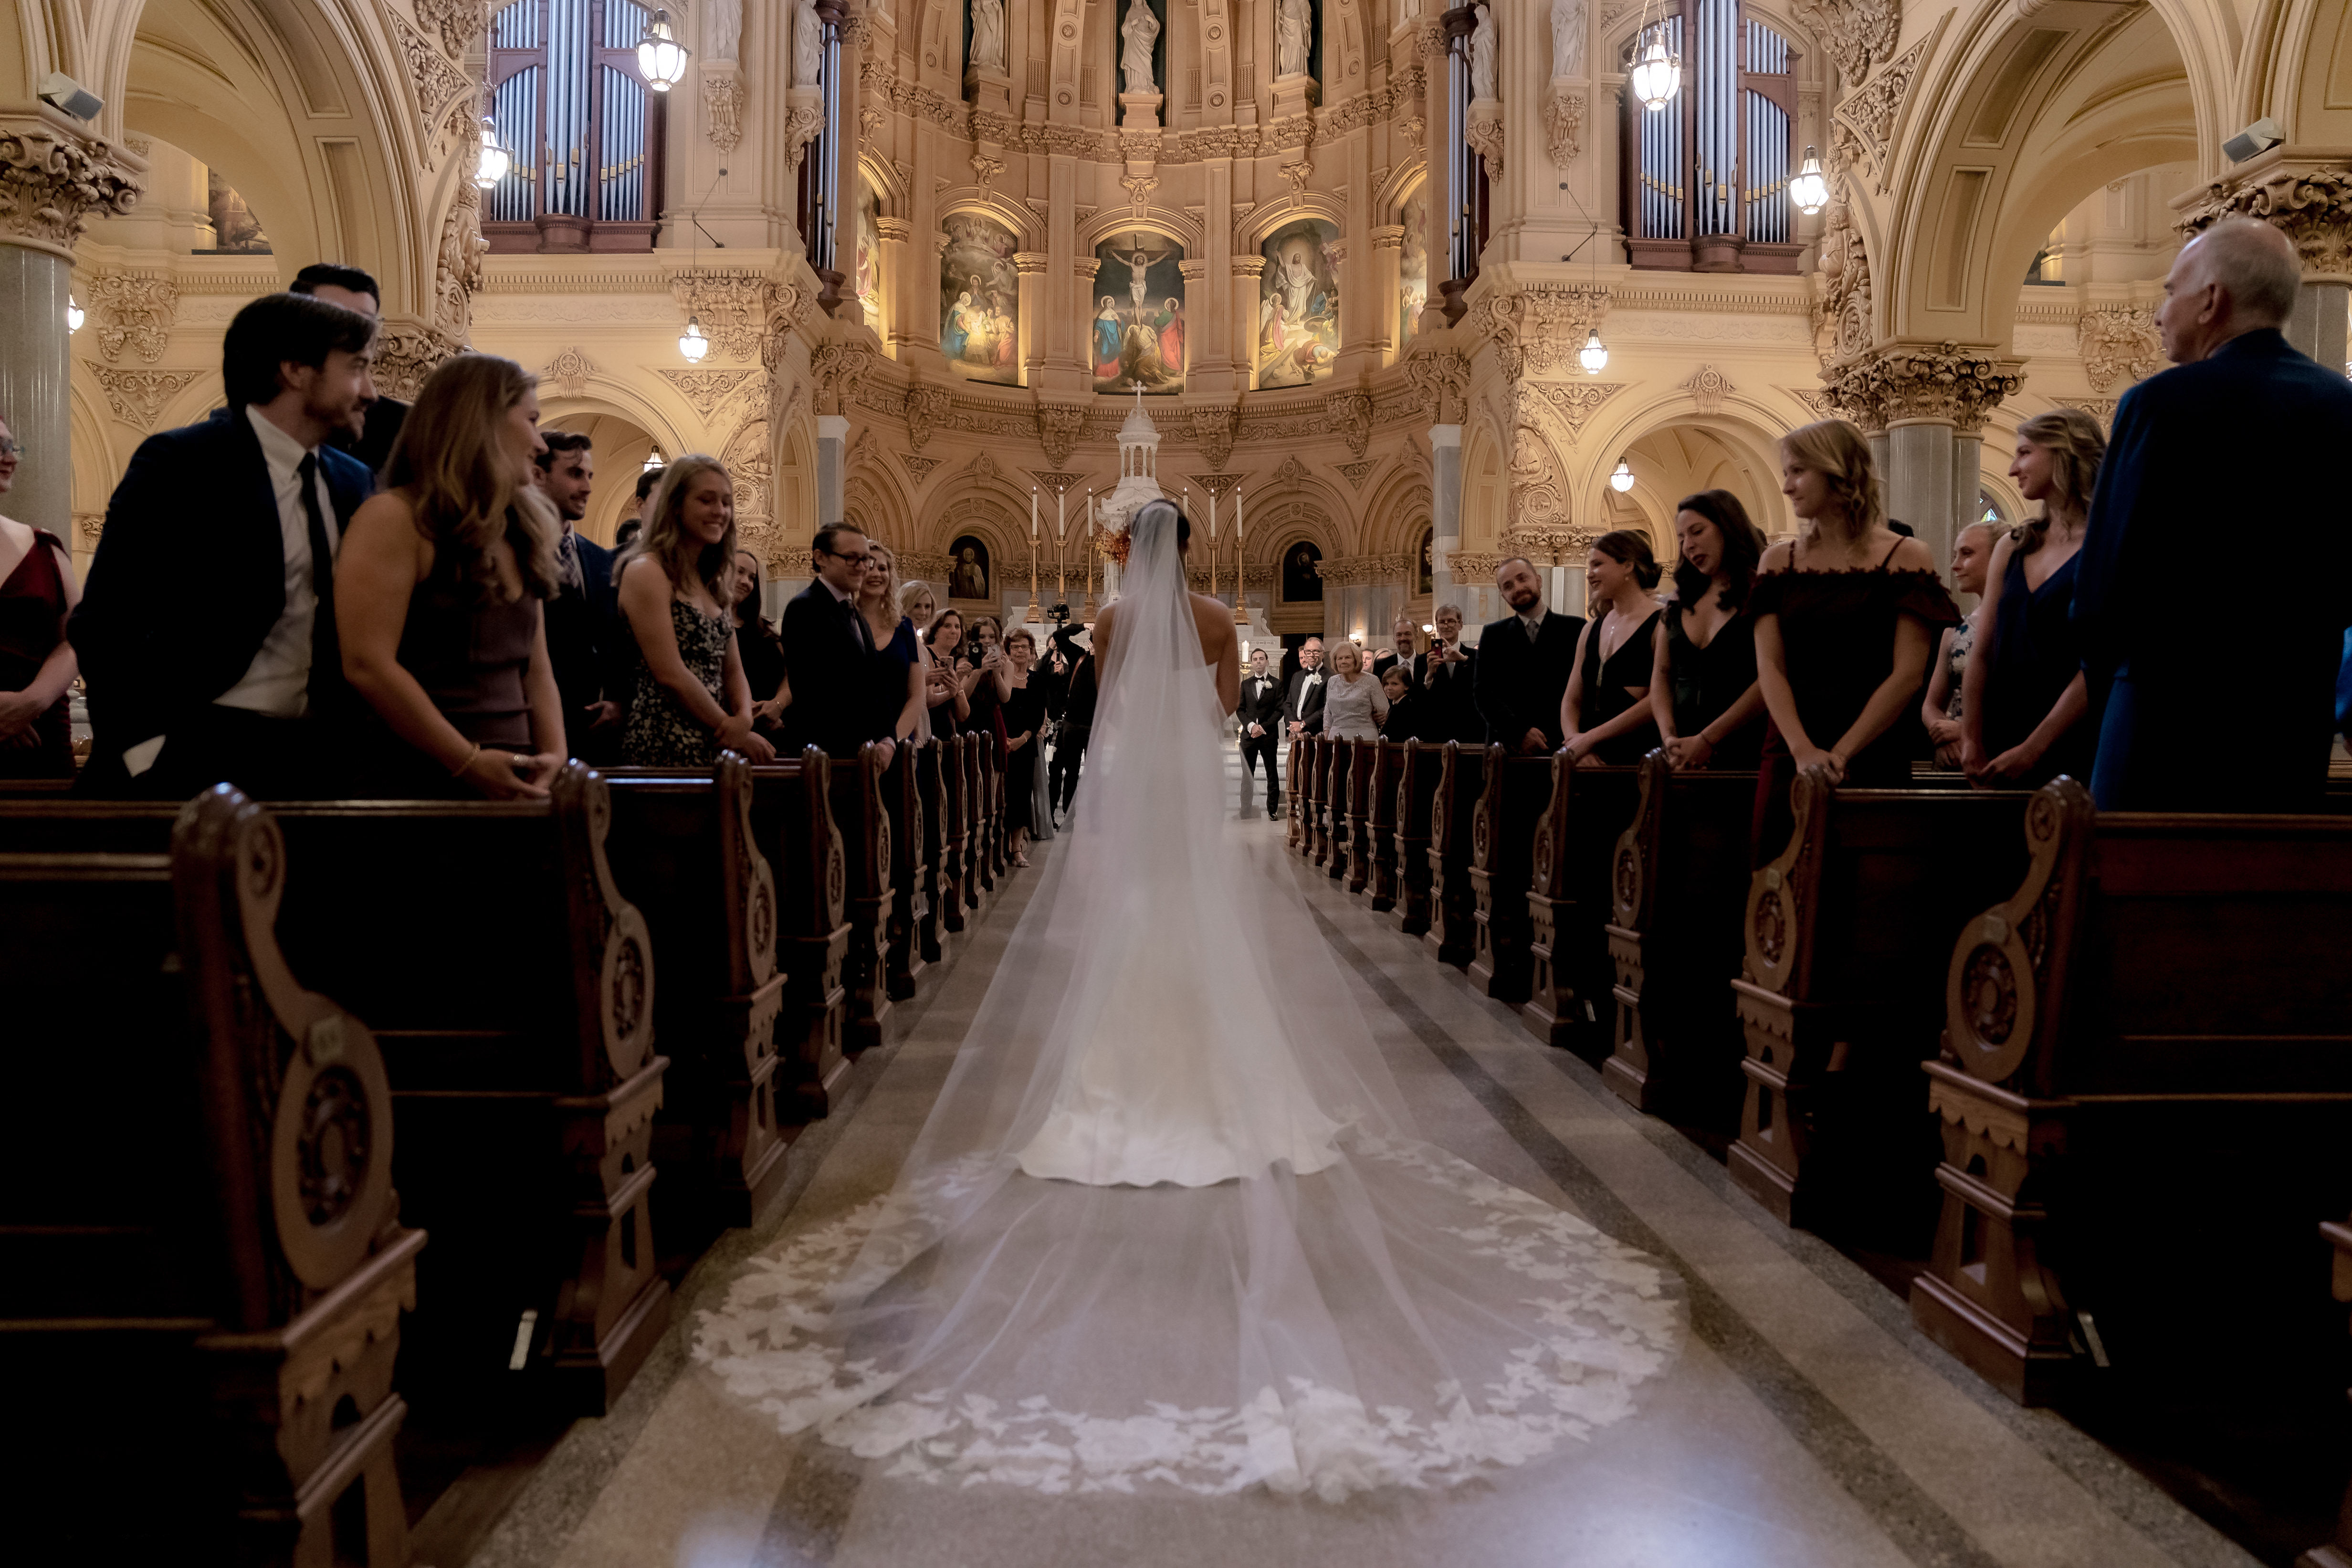 Leah Gervais wedding at St. Francis Xavier in New York City